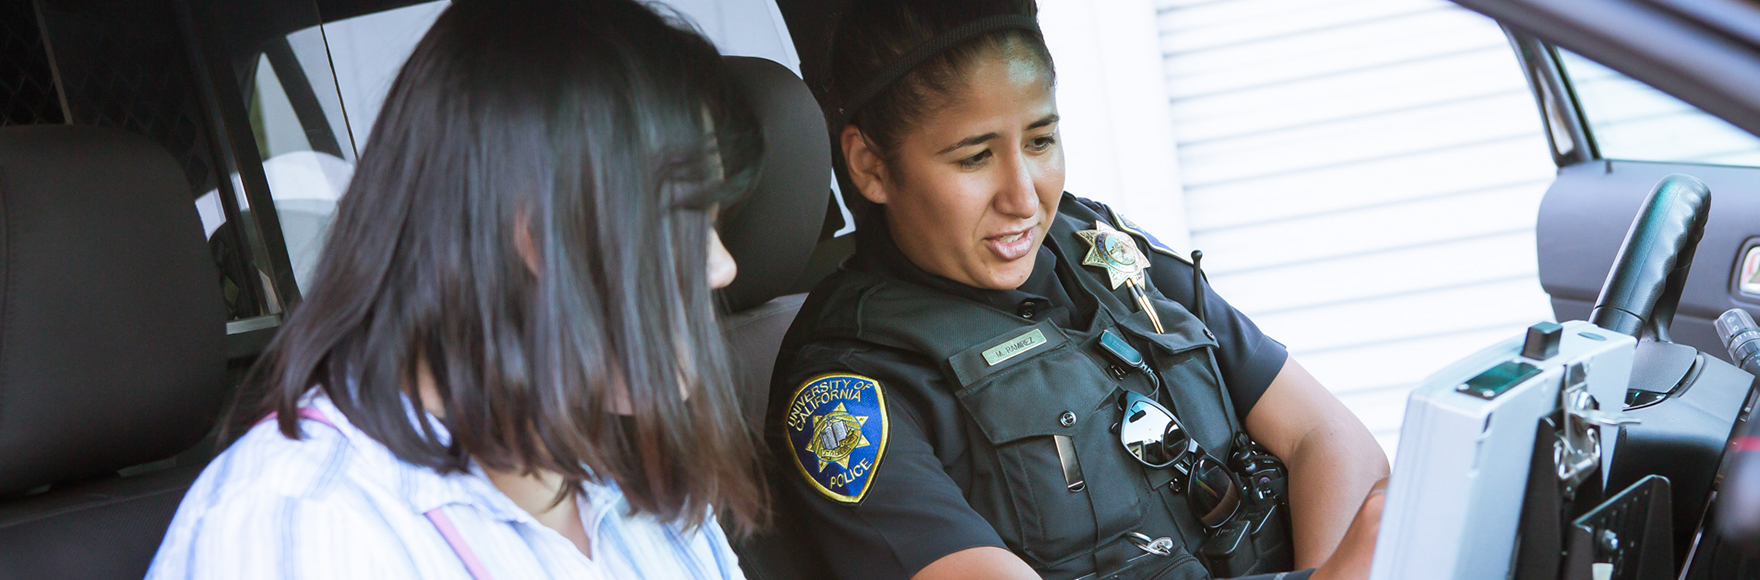 Officer showing a community member the patrol car